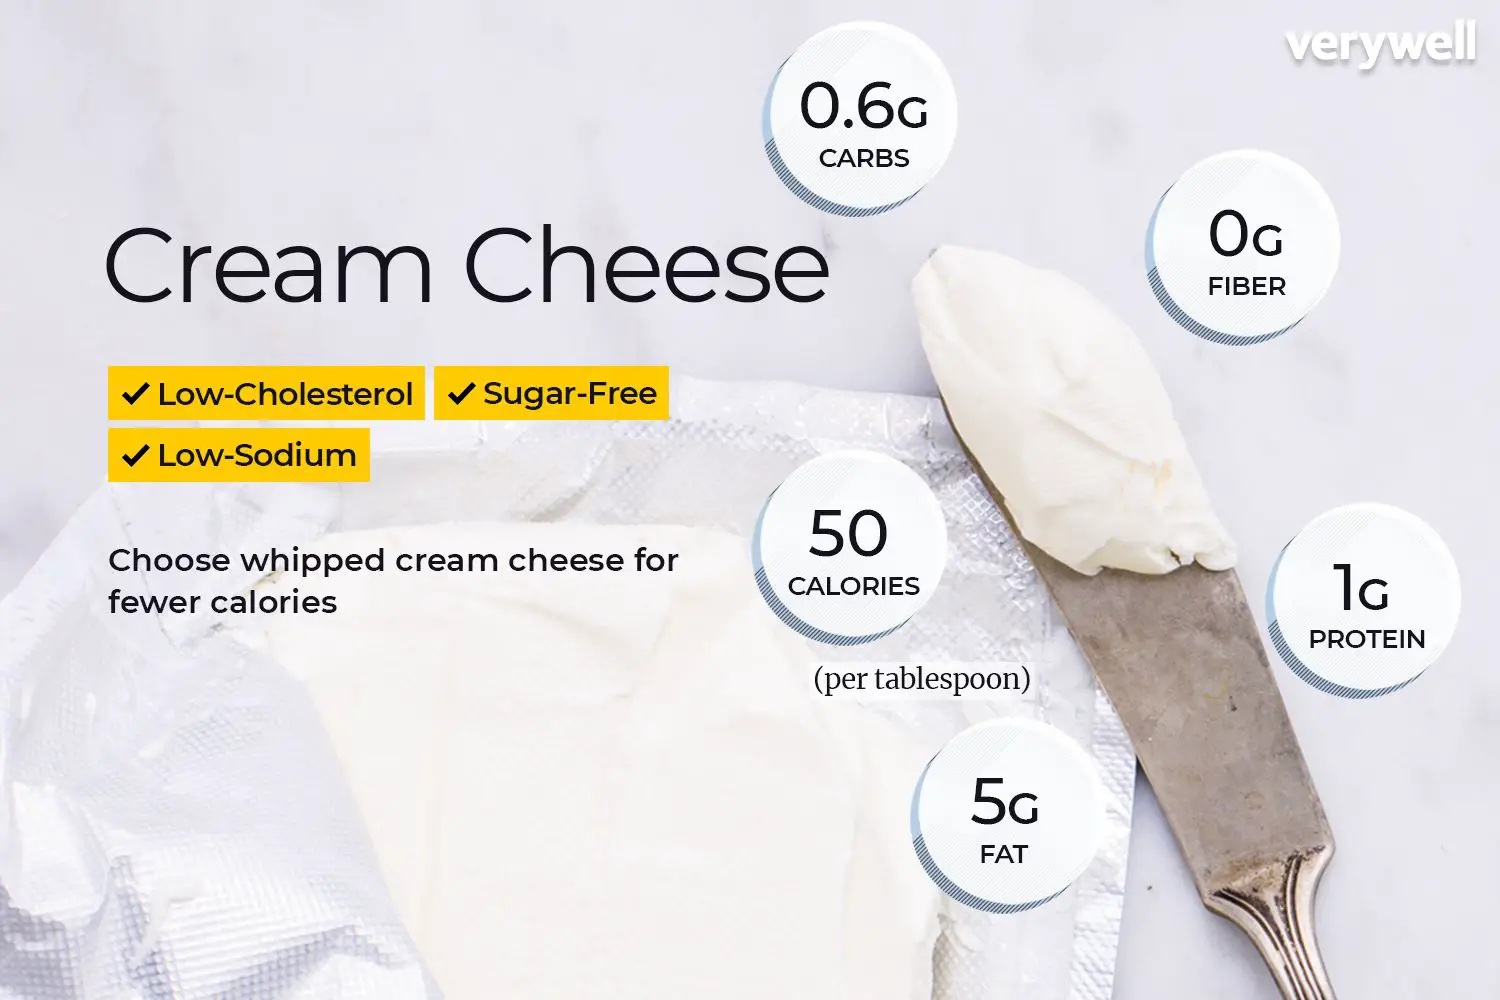 Cream Cheese Nutrition: Calories, Carbs, and Health Benefits